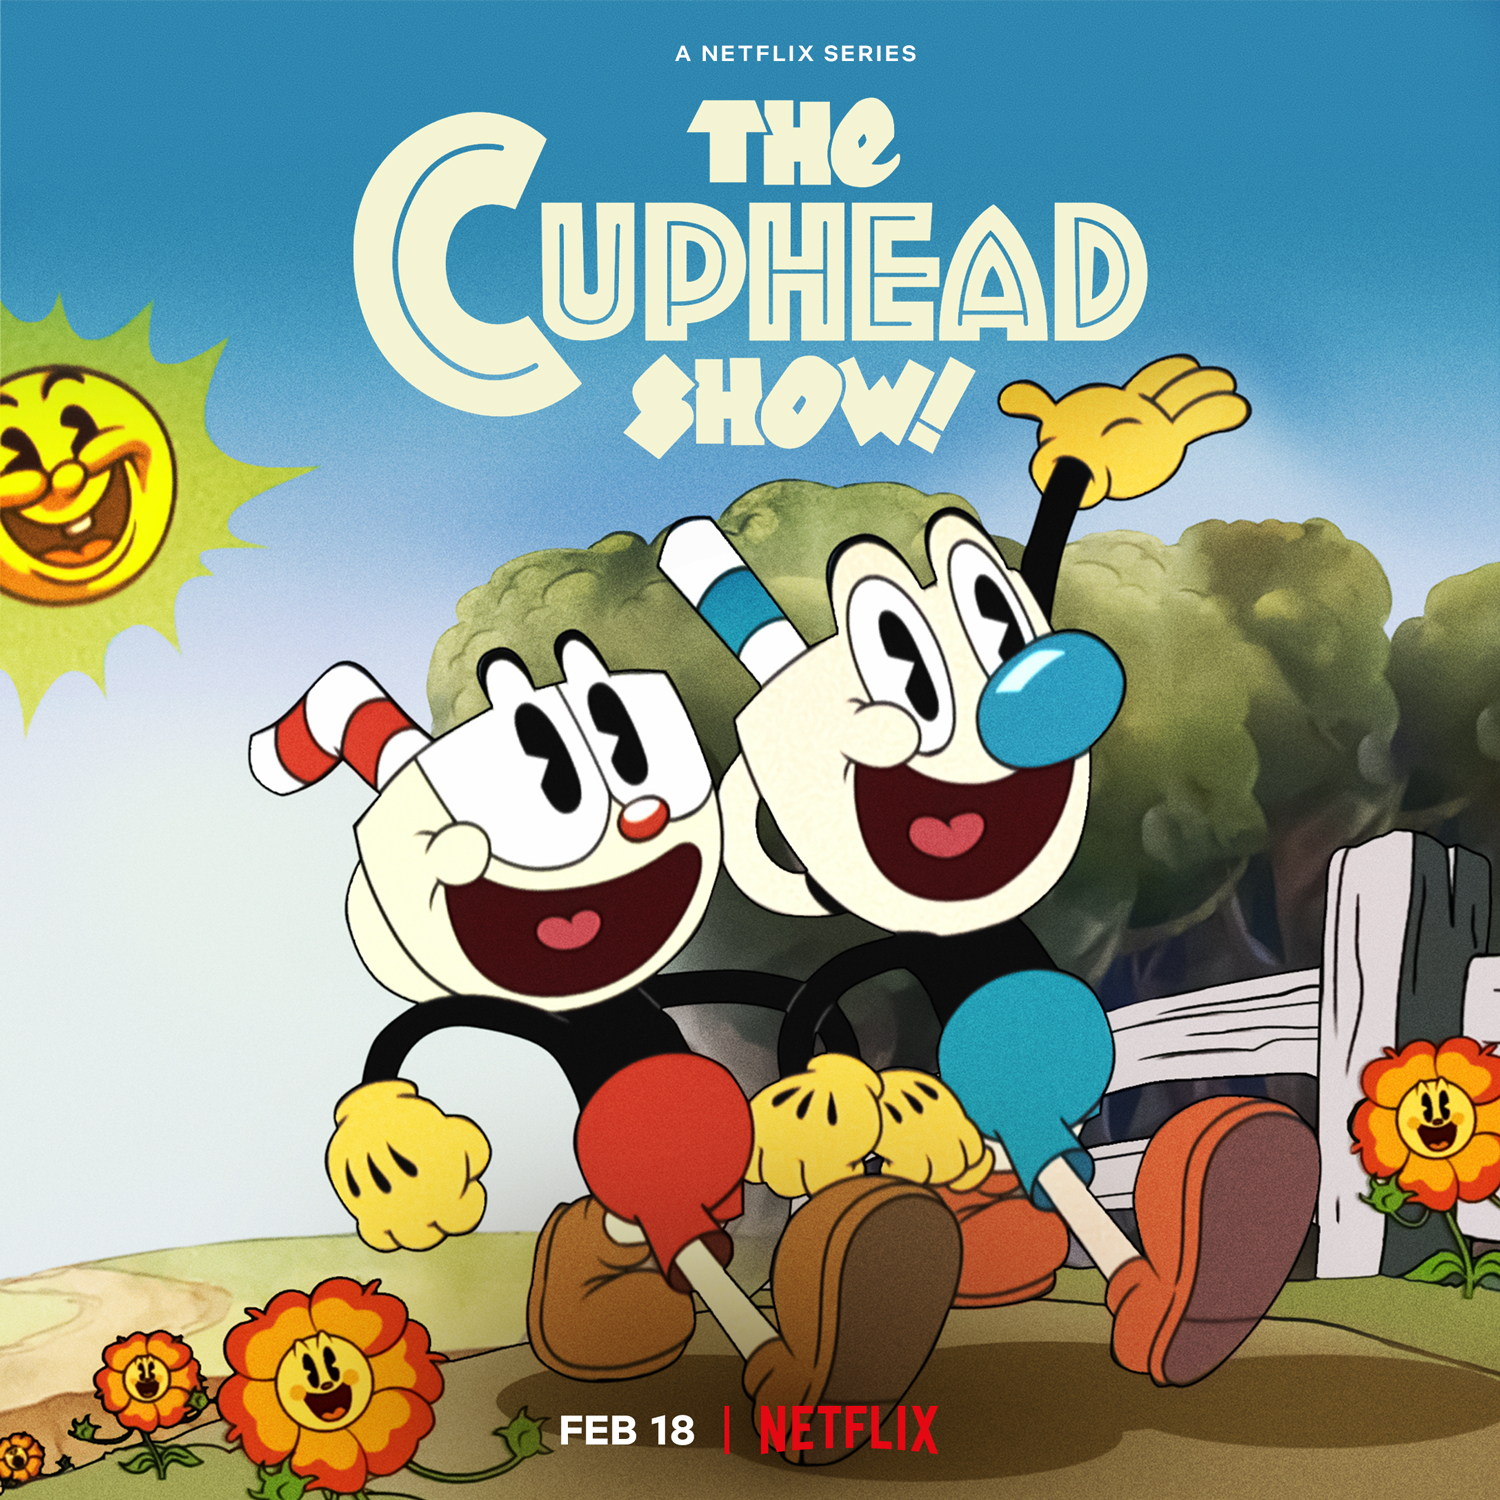 Netflix It: “The Cuphead Show!” – The Recorder